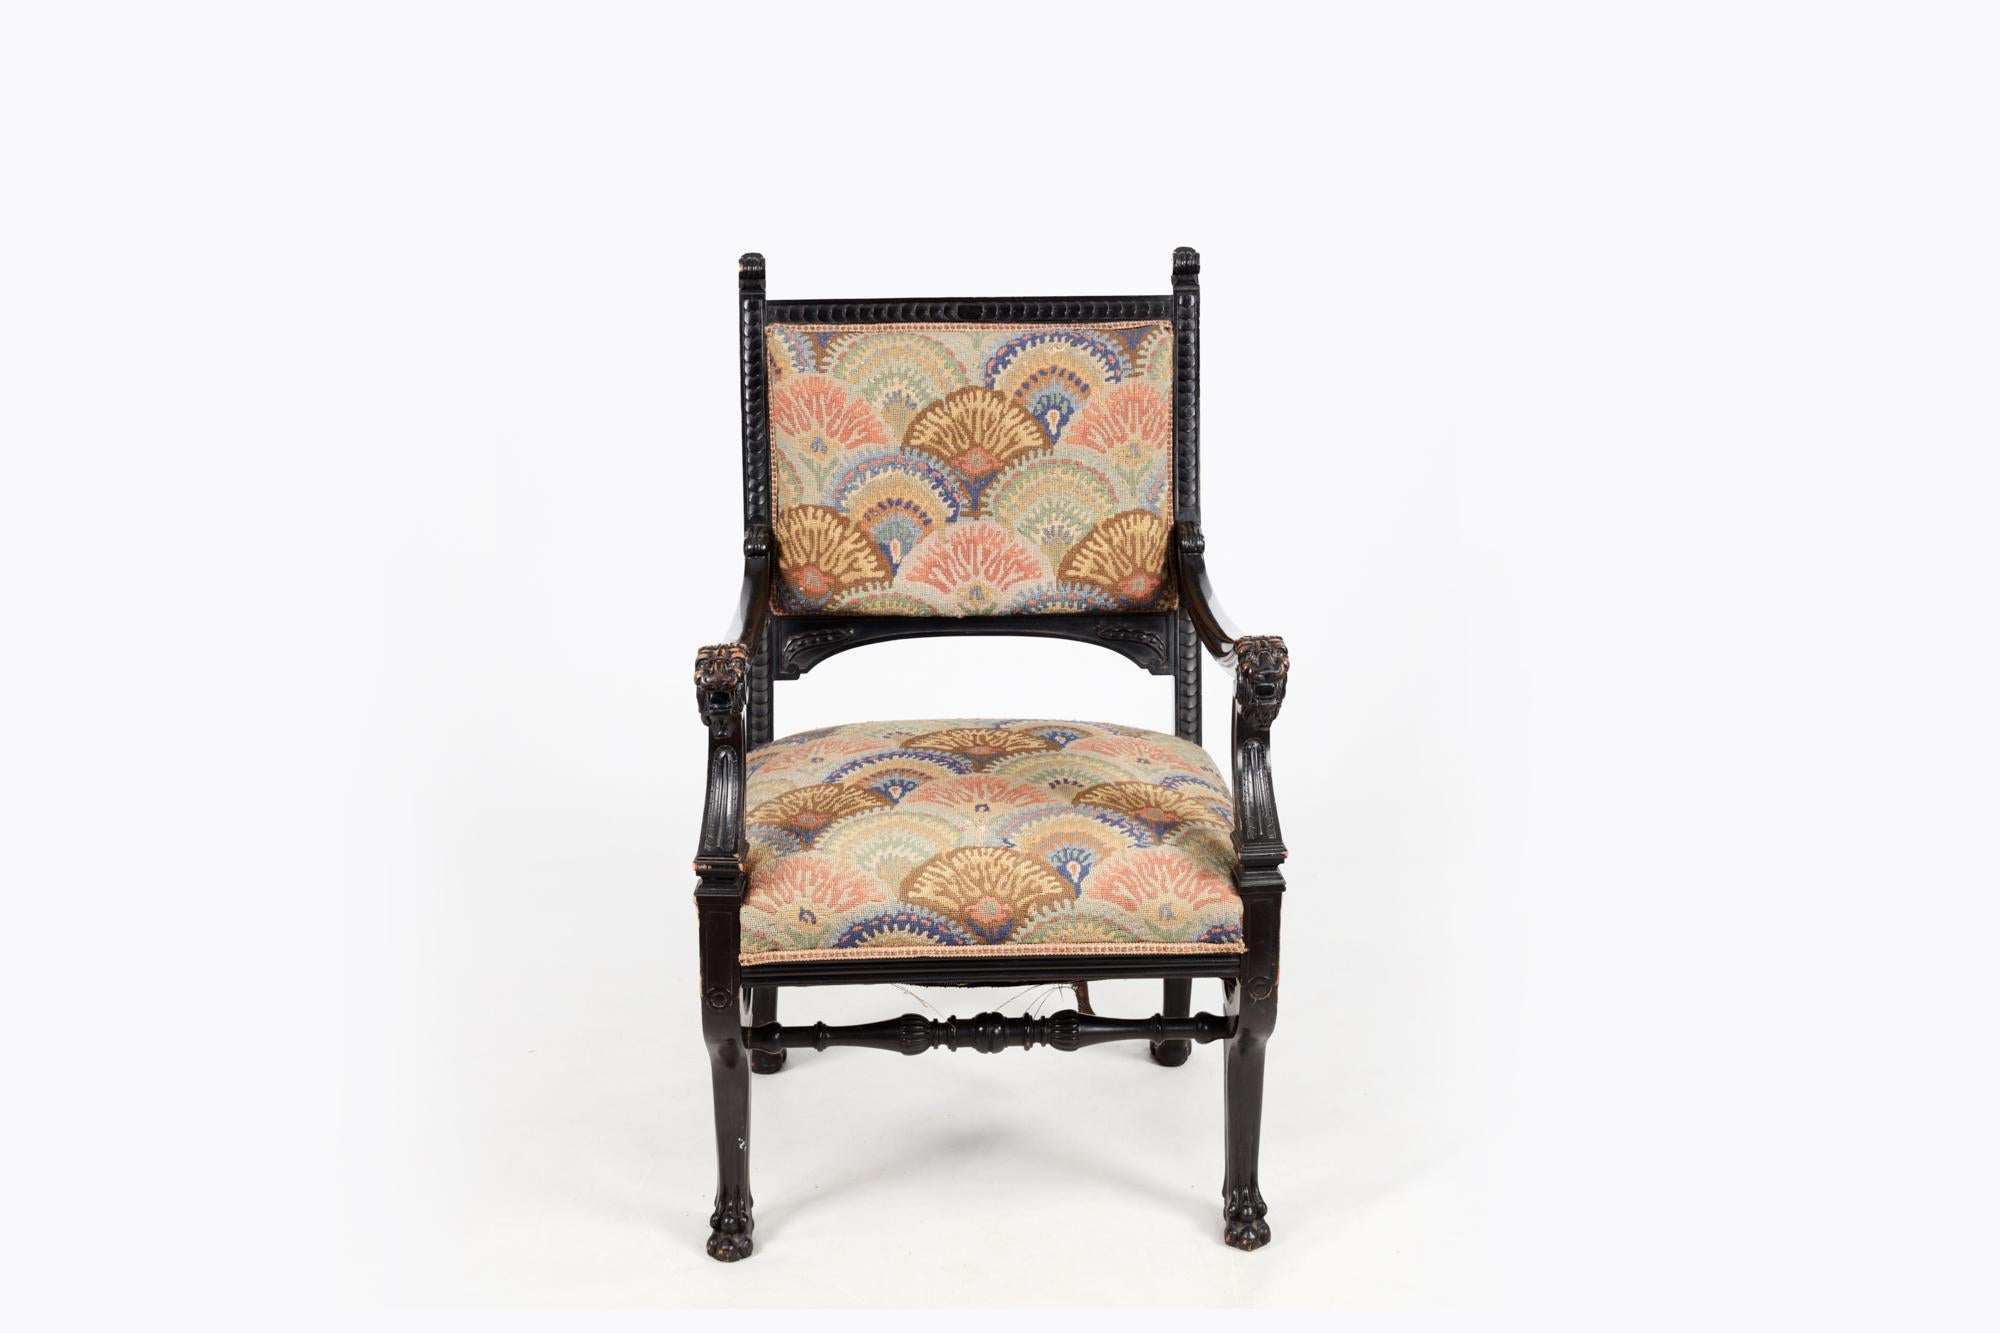 19th Century Regency ebonised carved library chair with needlepoint back and seat, of solid wood construction and finely carved details. The arms of the chair terminate in carved lion masks and the legs terminate in four hairy paw feet. It features